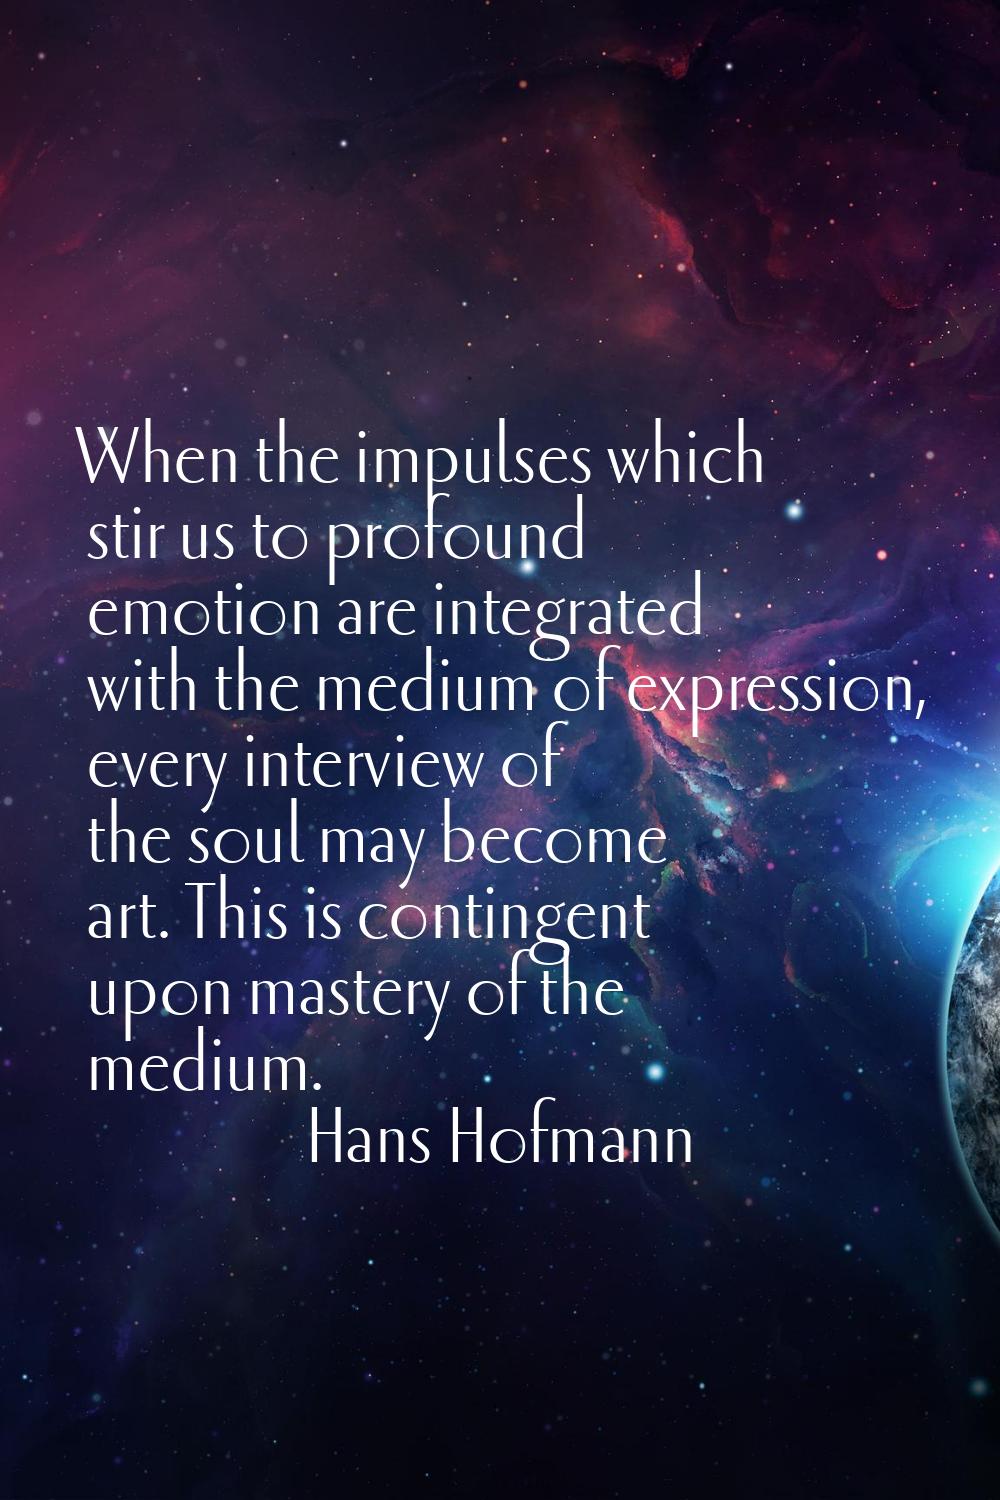 When the impulses which stir us to profound emotion are integrated with the medium of expression, e